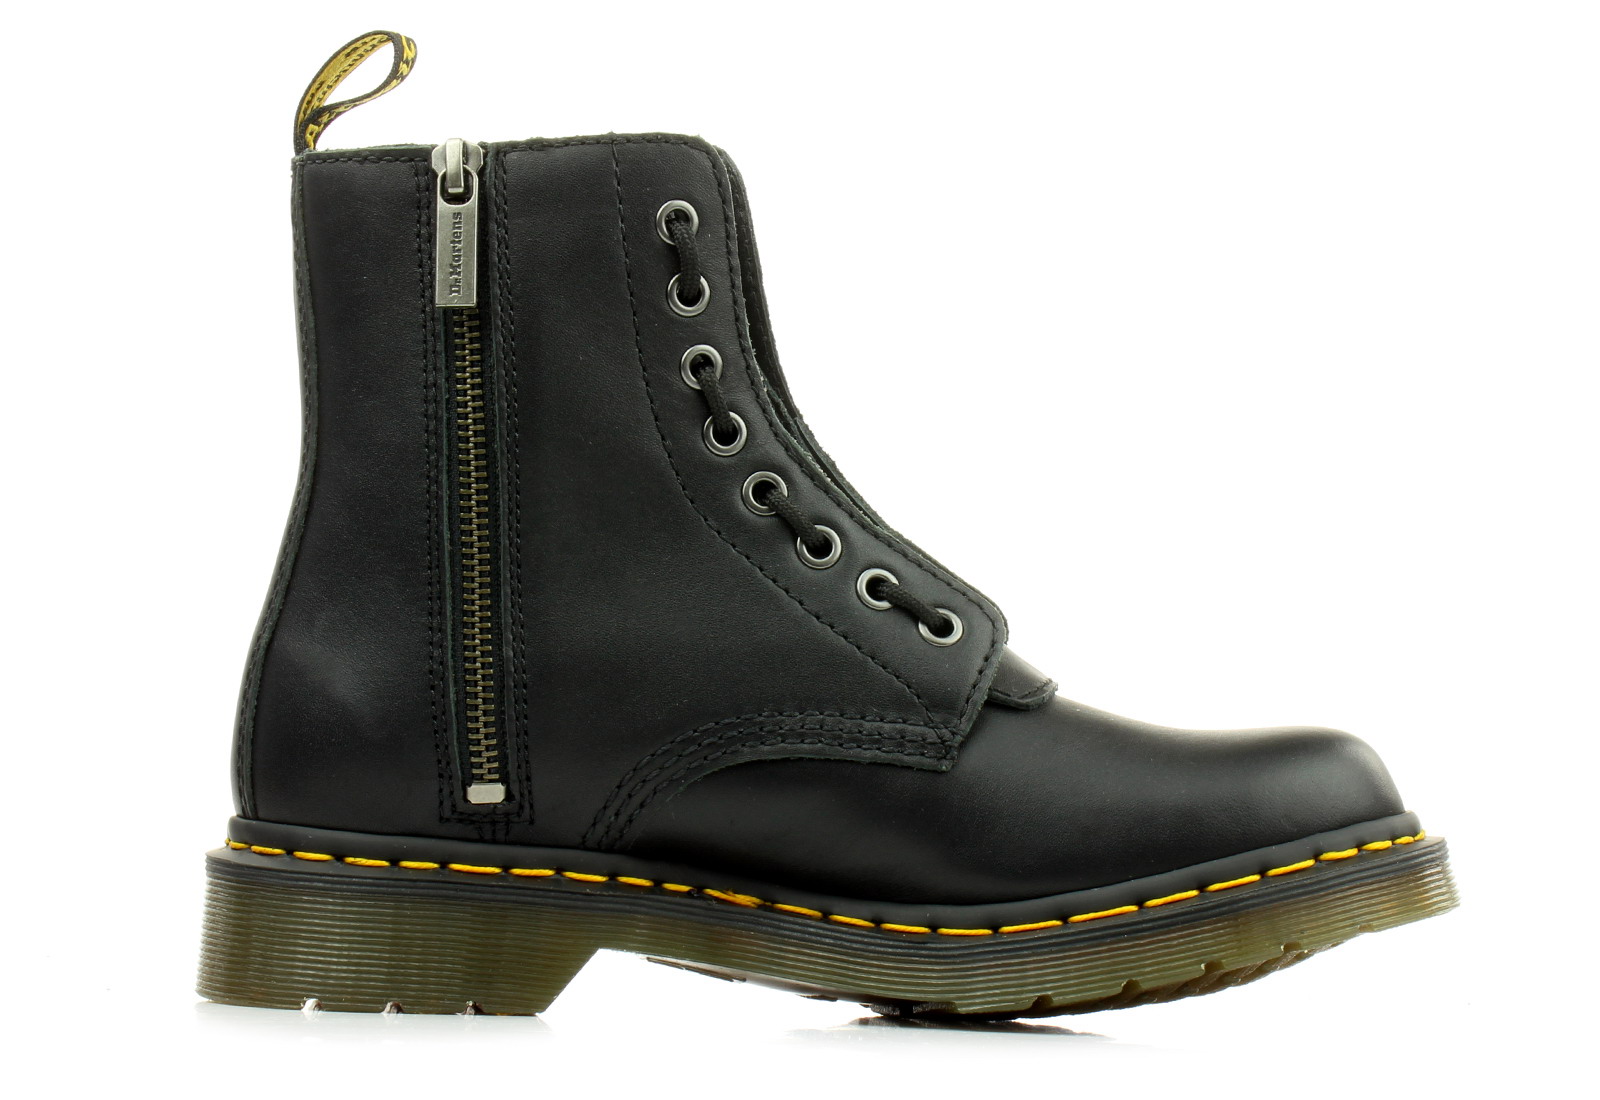 Dr Martens Casual Crna Duboke cipele - 1460 Pascal Frnt Zip - Office ...